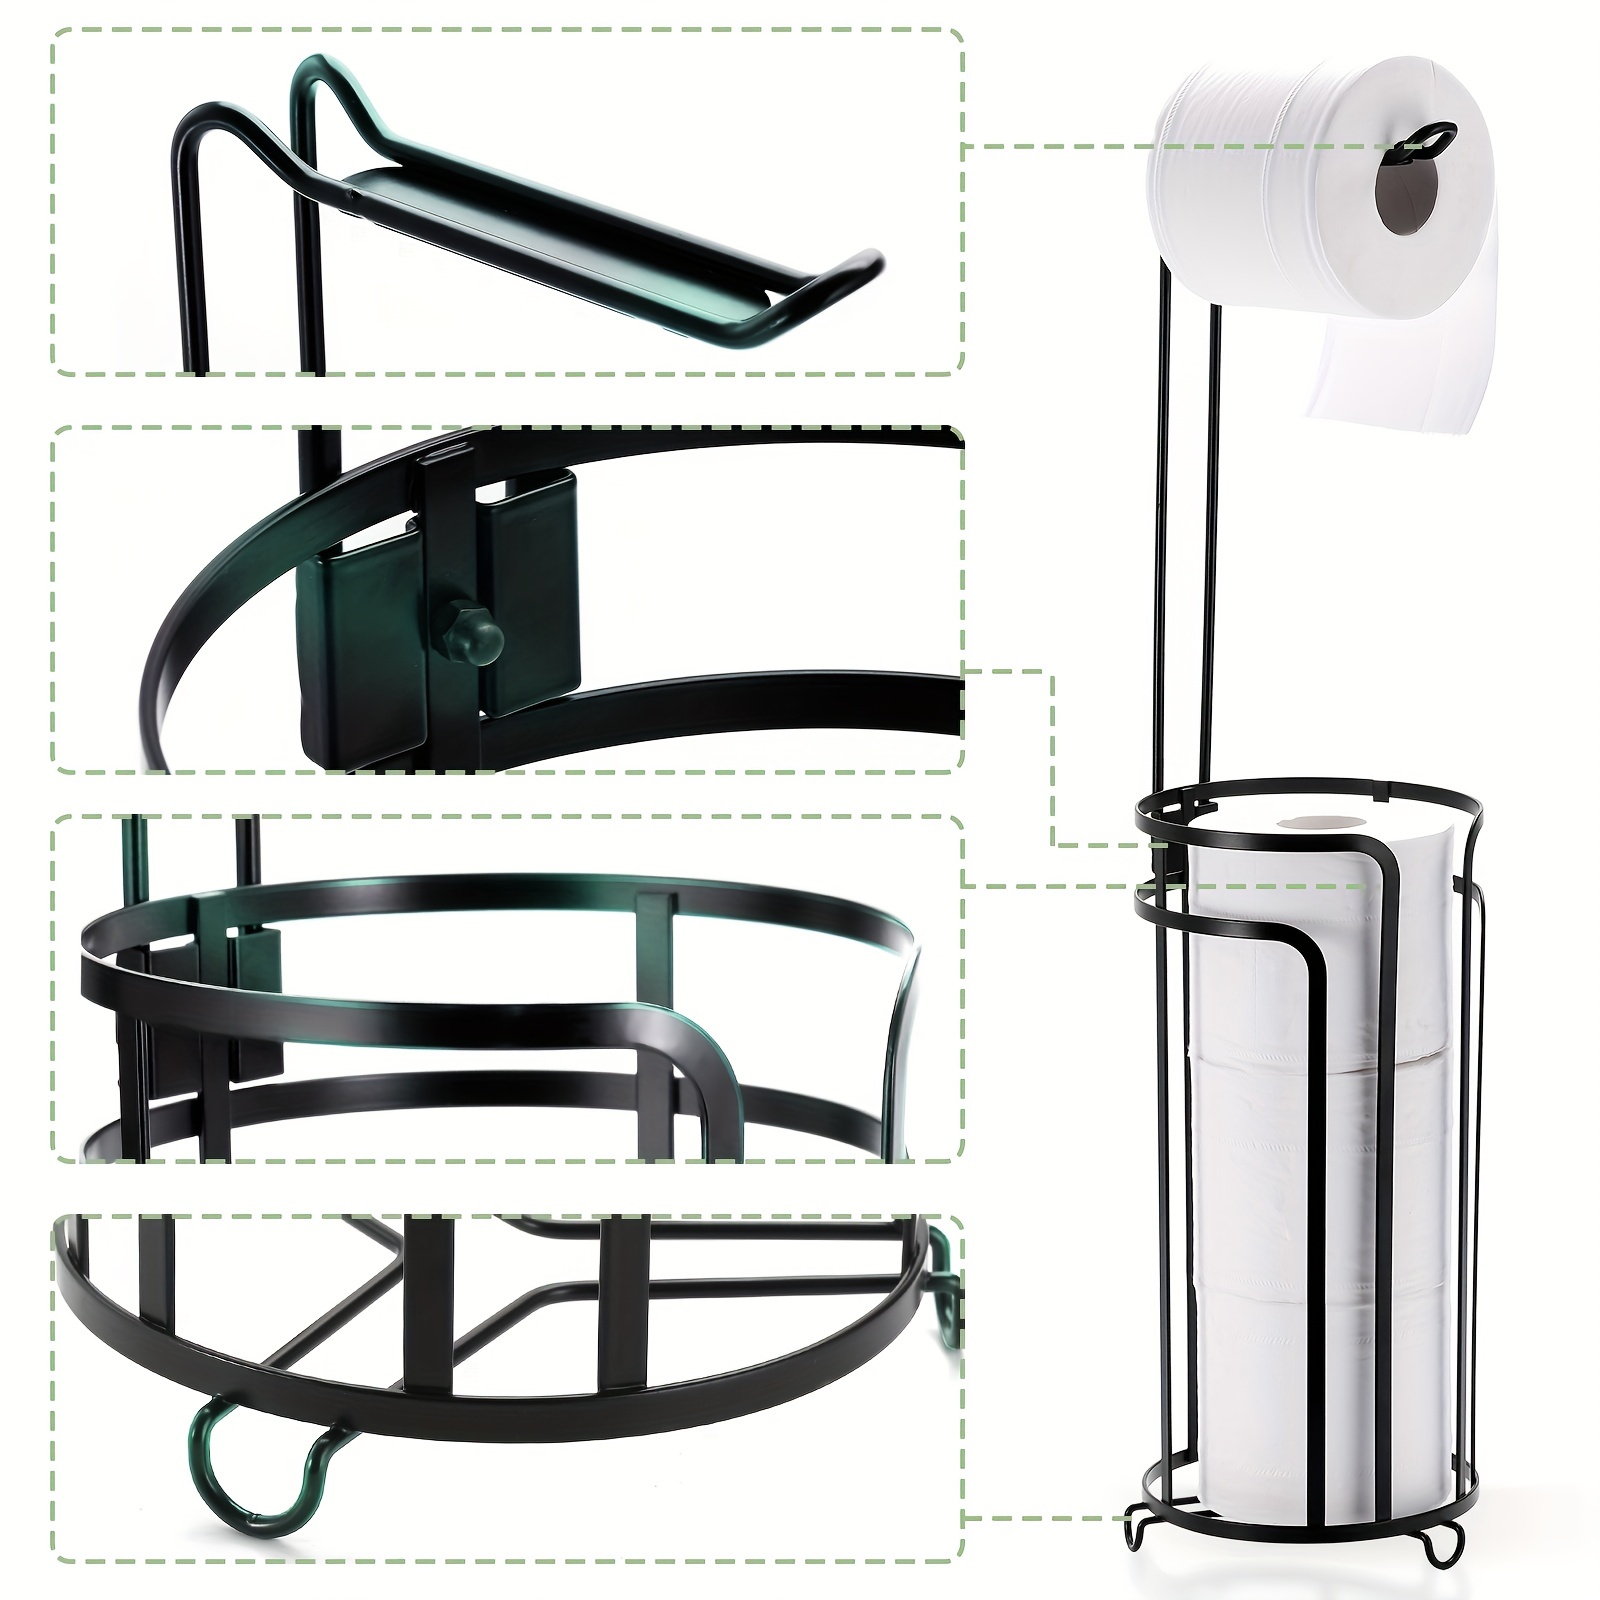 Toilet Paper Holder Stand with Reserve and Dispenser for 4 Mega